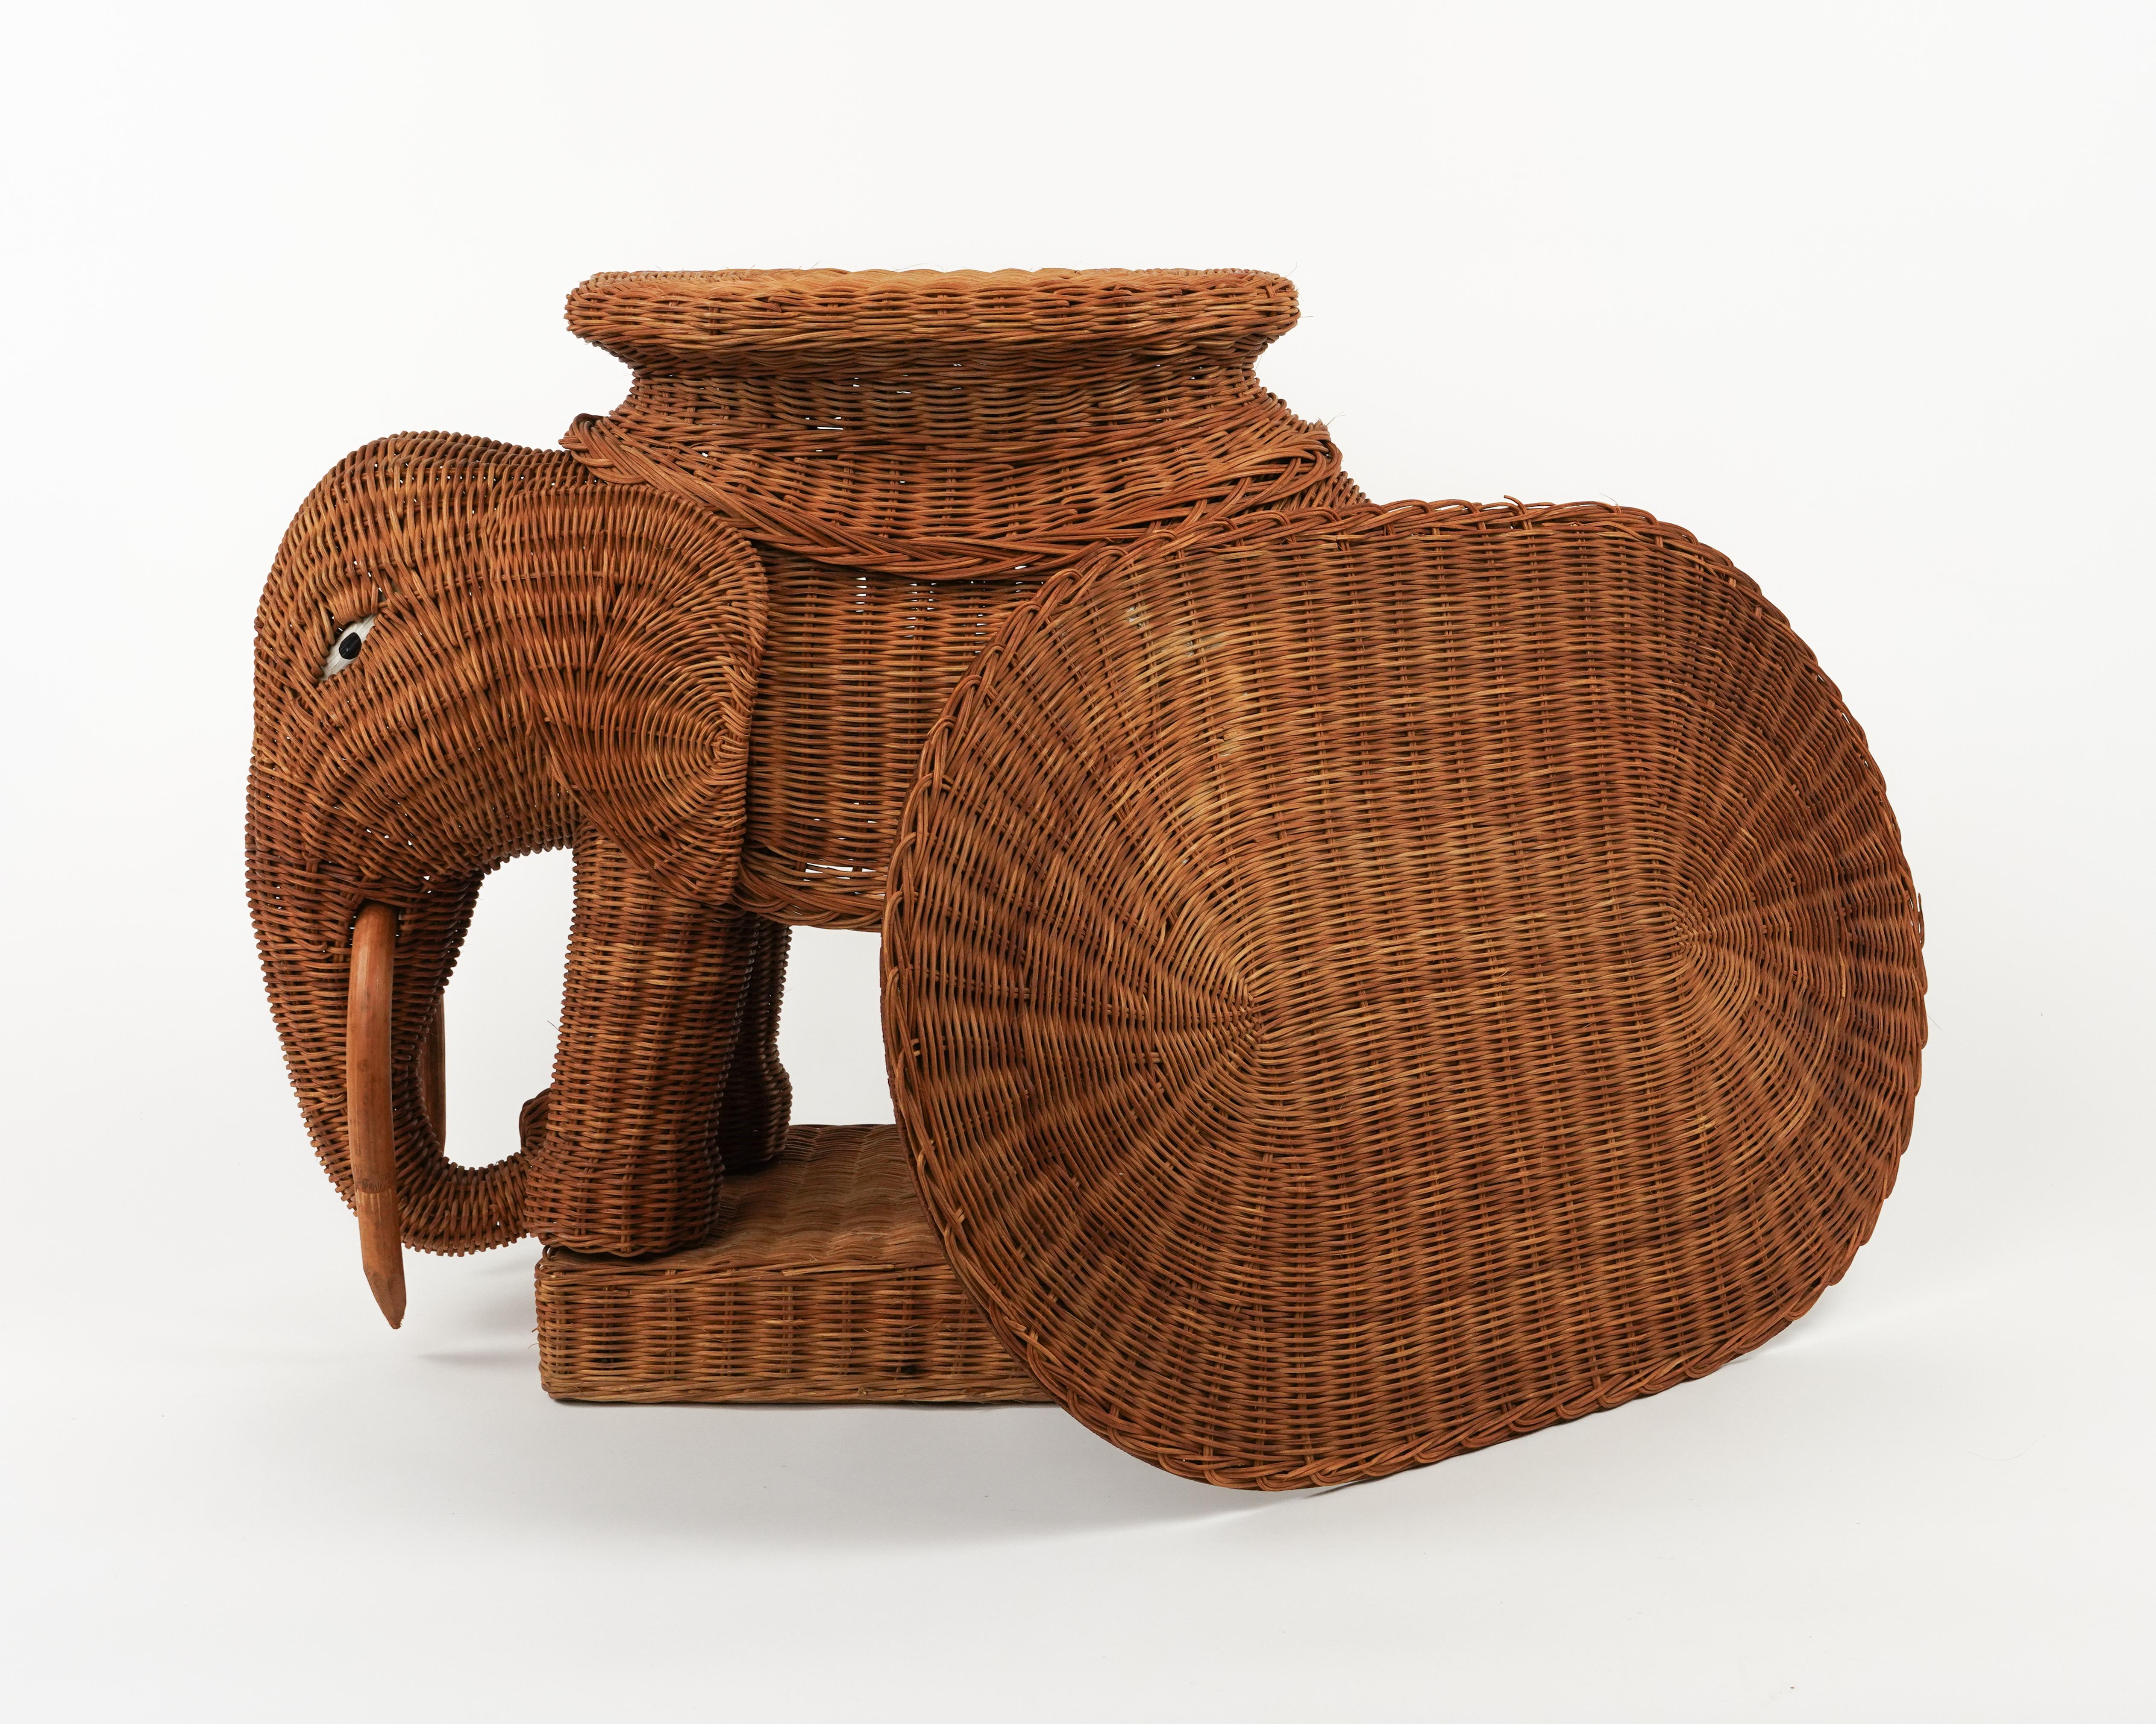 Rattan and Wicker Elephant Side Coffee Table Vivai Del Sud Style, Italy, 1960s For Sale 3